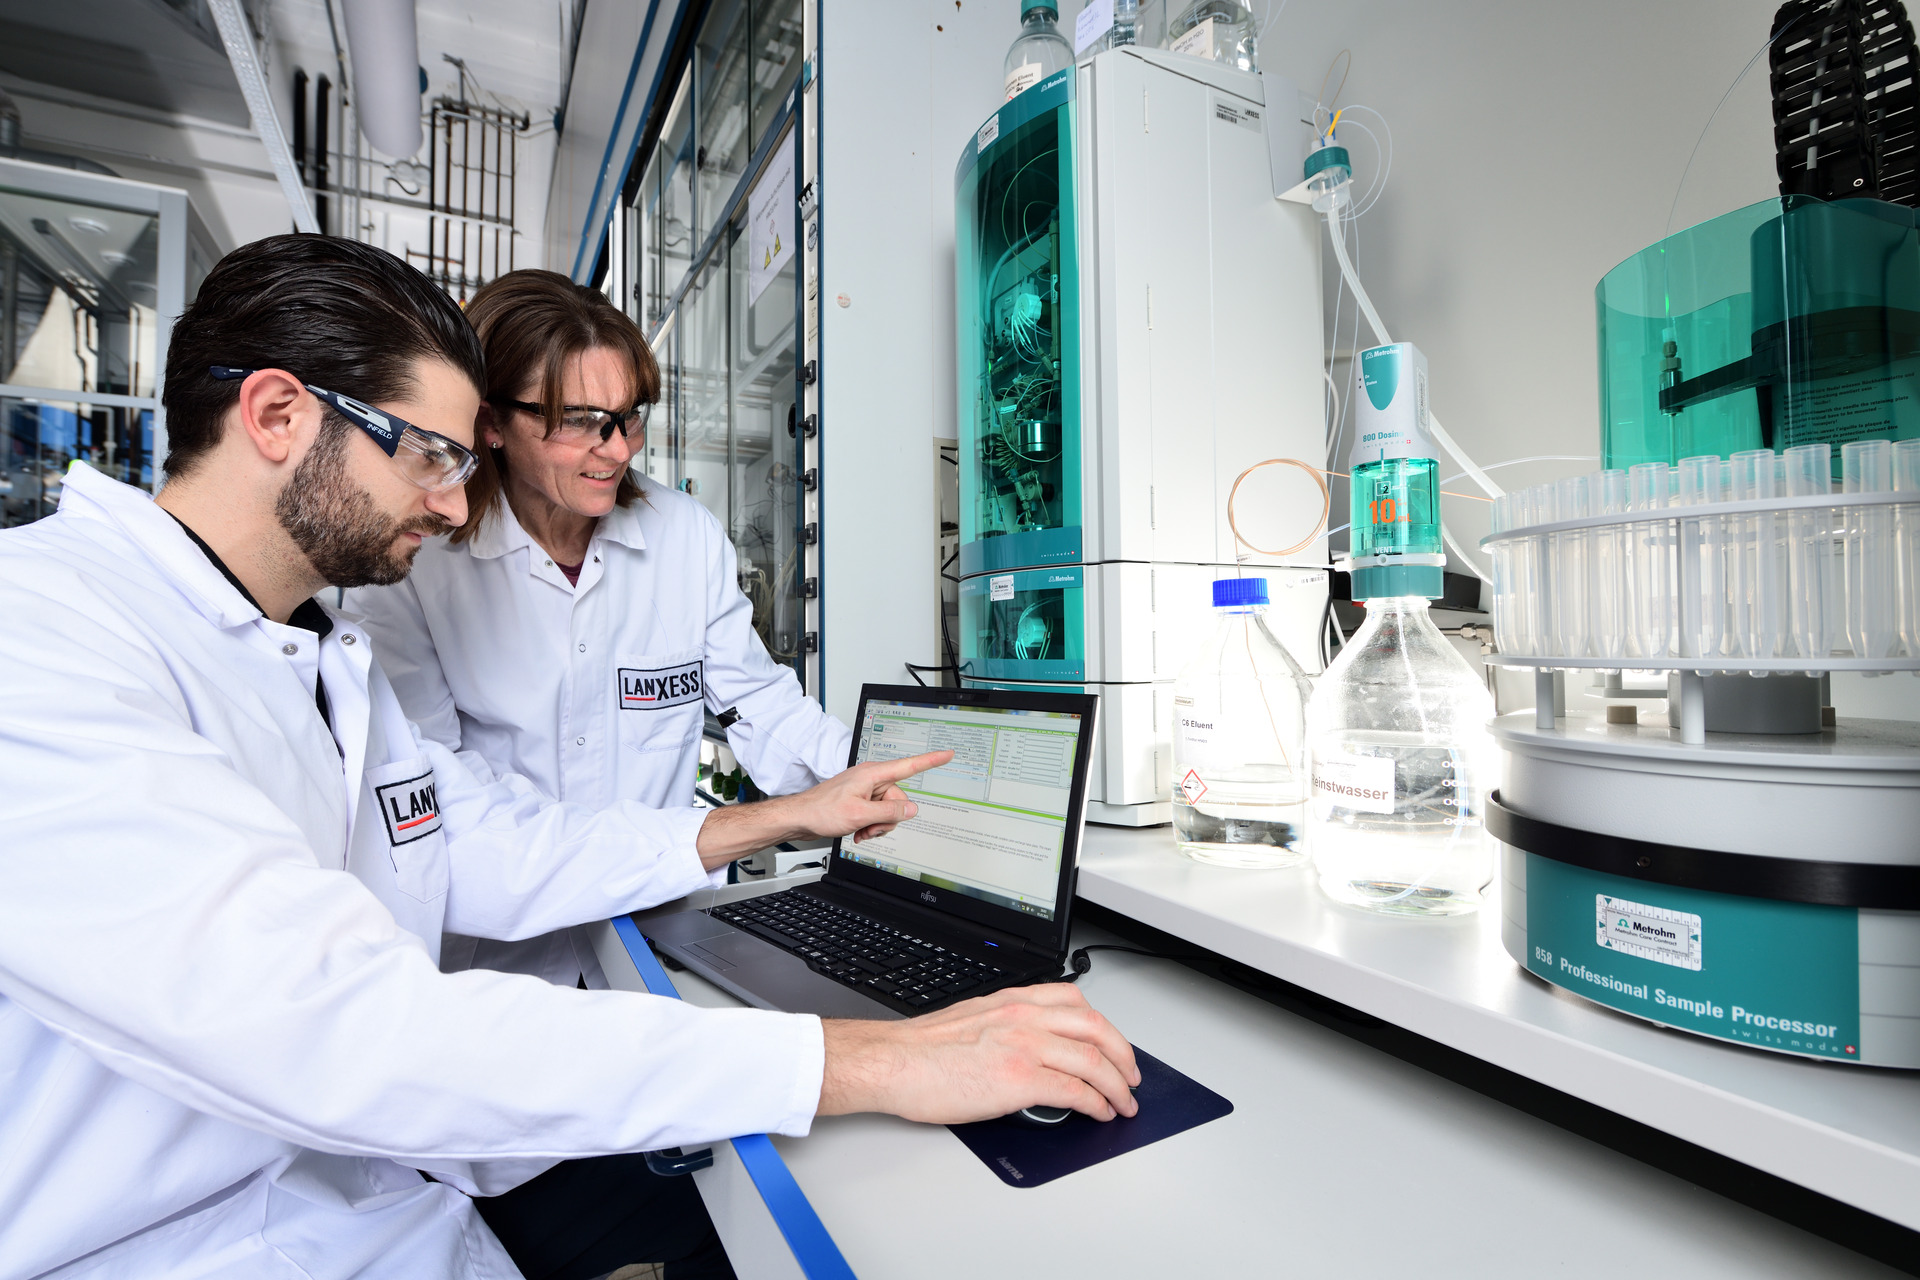 Ion analysis in an analytical laboratory at Lanxess in Leverkusen. (Image: Lanxess AG)